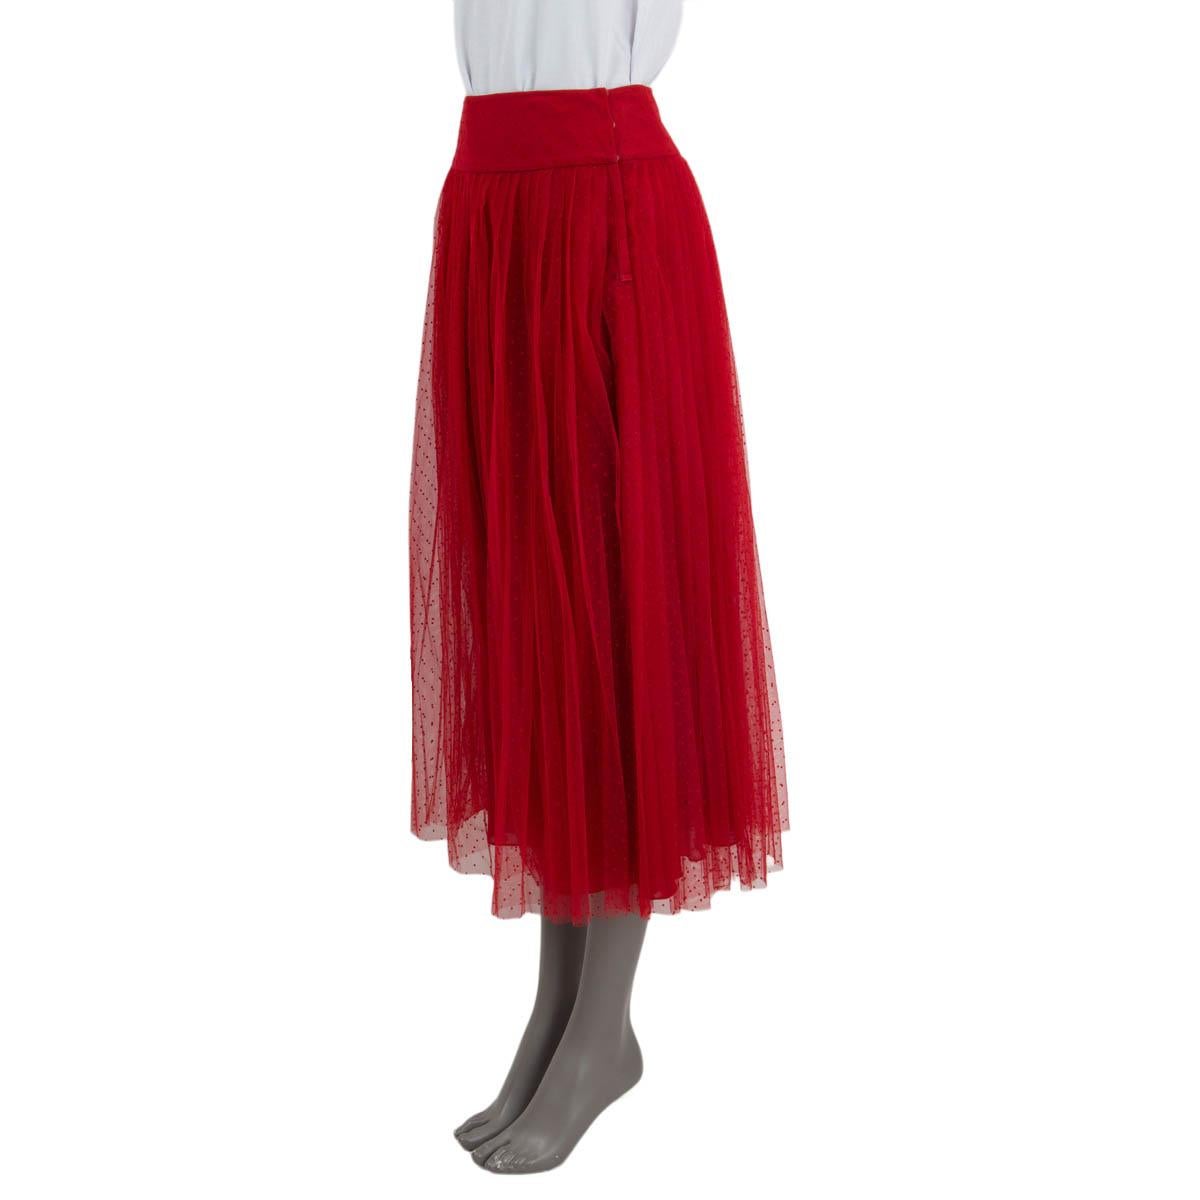 100% authentic Christian Dior Spring/Summer 2017 pleated polka dot tulle midi skirt in red polyamide (100%). Opens with push buttons and a hook on the side. Lined in red silk (100%). Has been worn and is in excellent